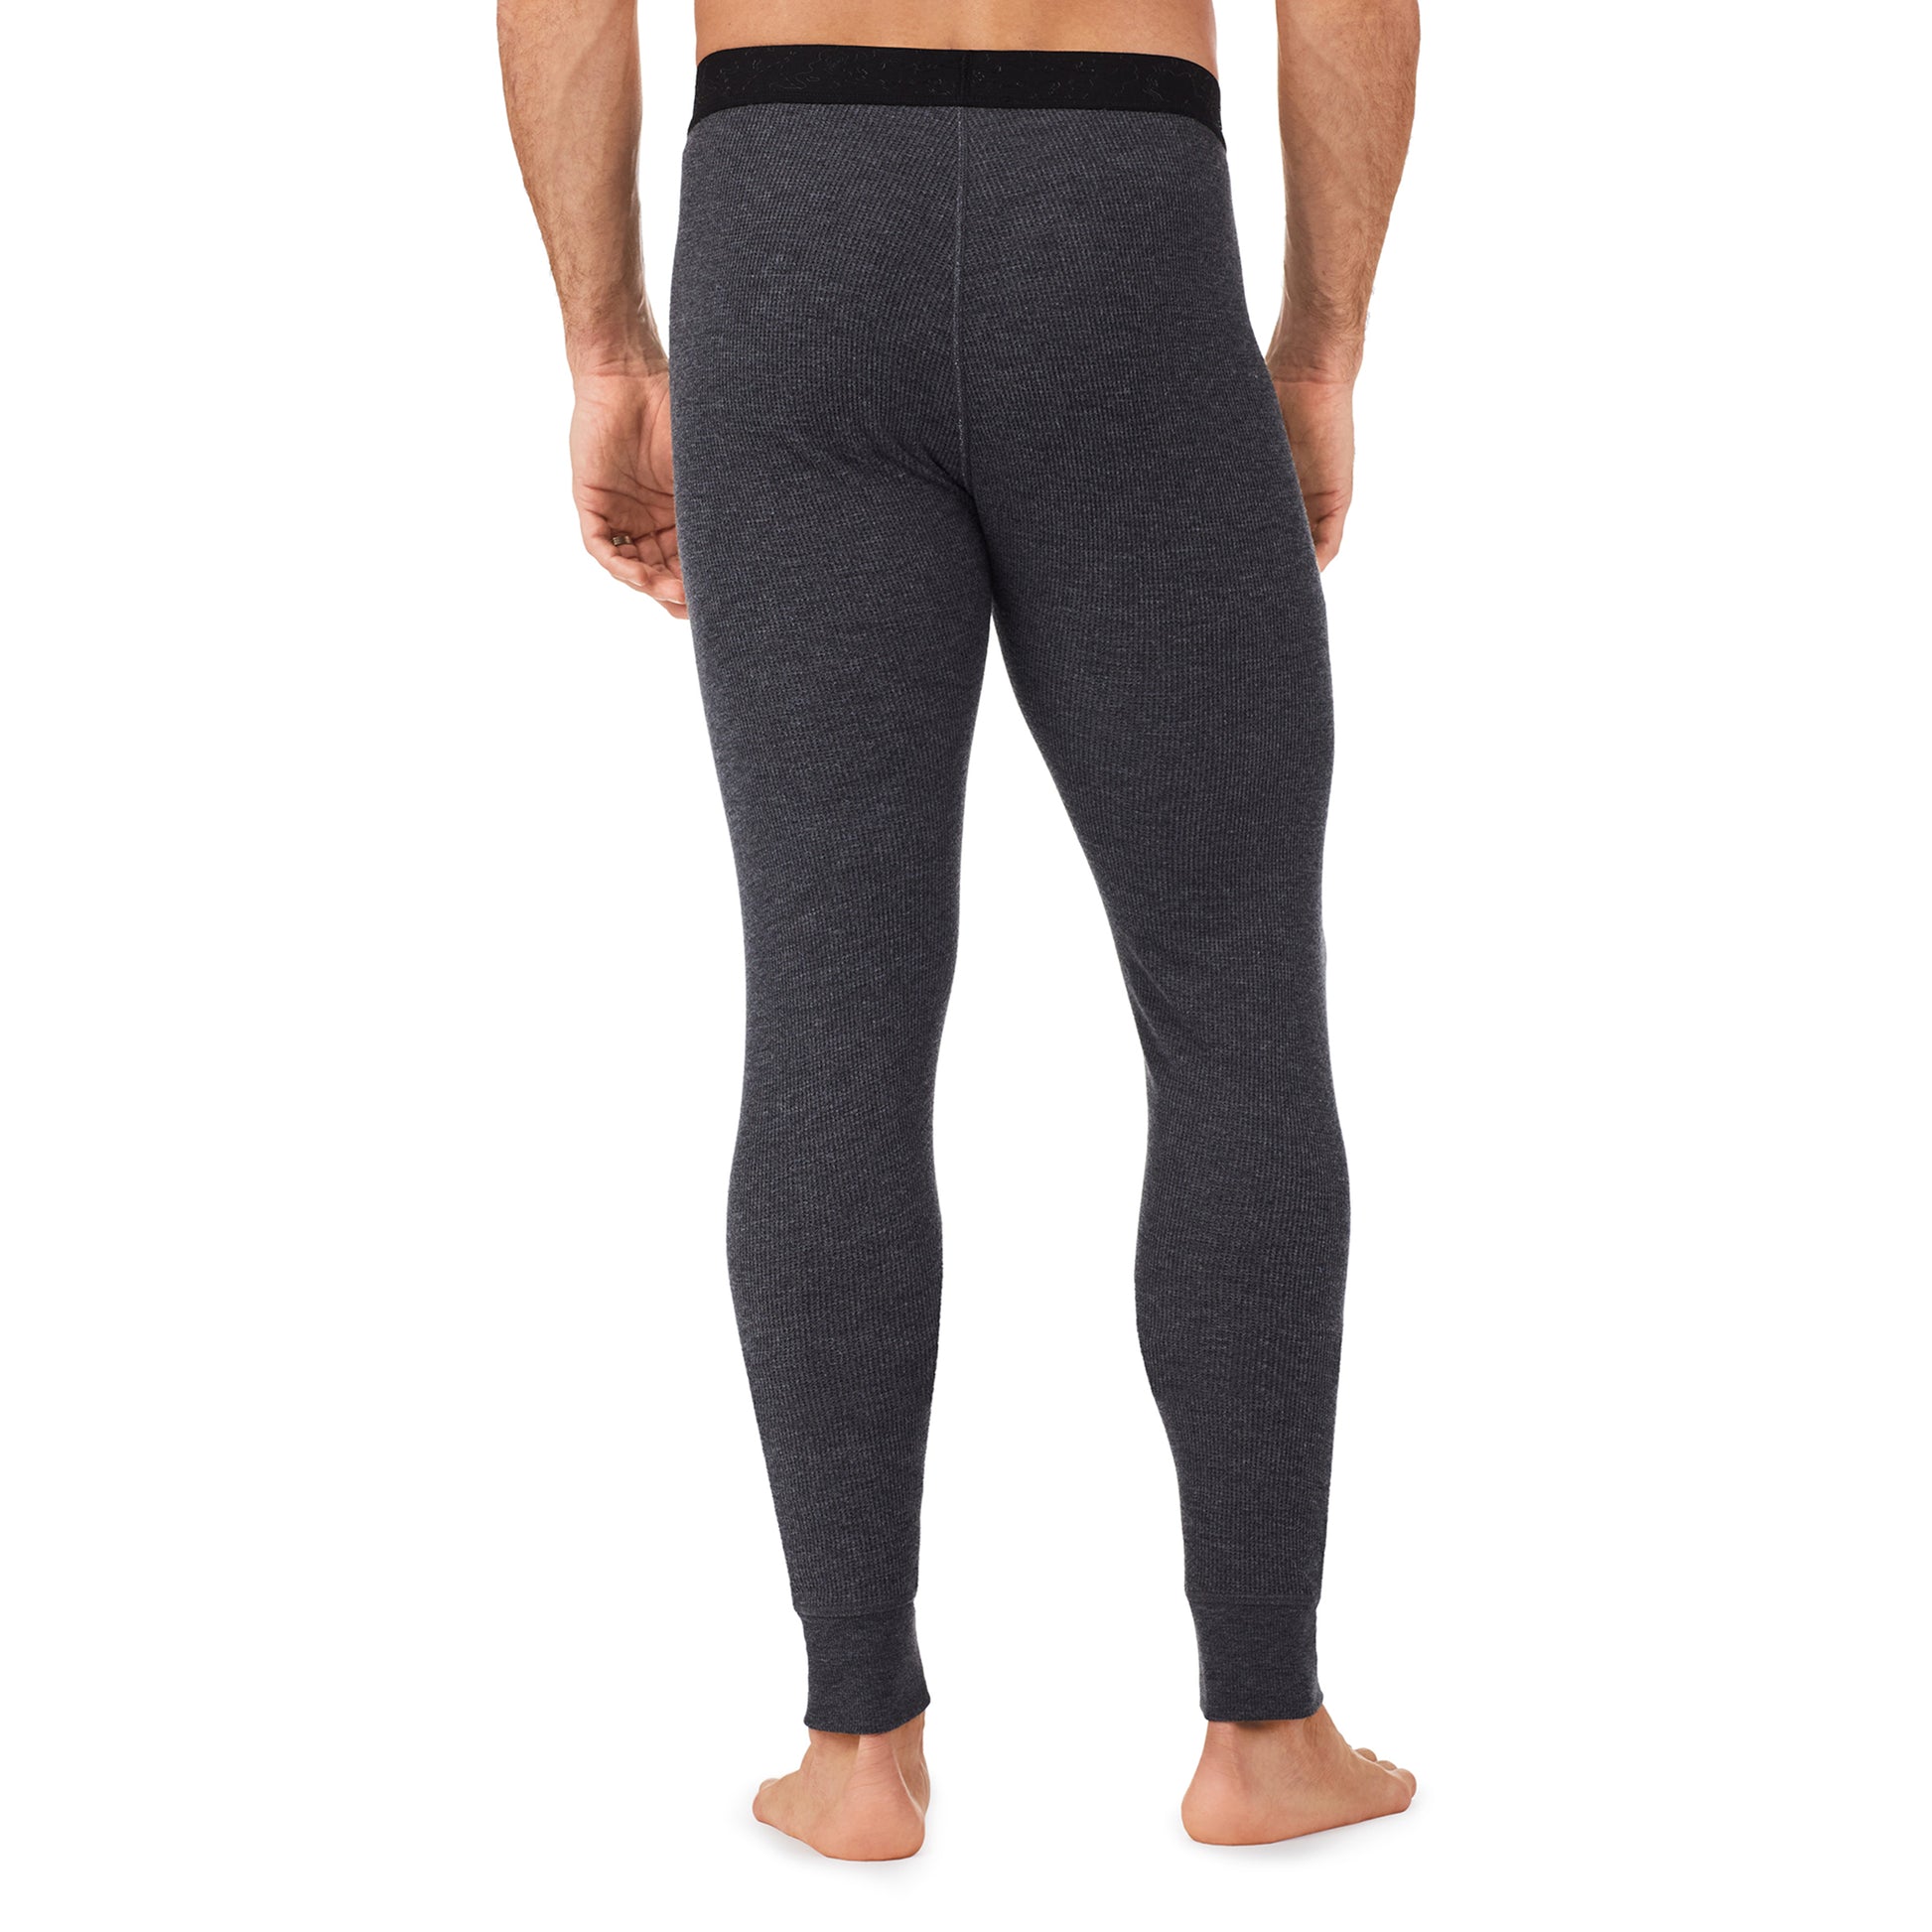 Charcoal Heather; Model is wearing size M. He is 6'1", Waist 31", Inseam 33".@A man wearing a charcoal heather waffle thermal pant big & tall..